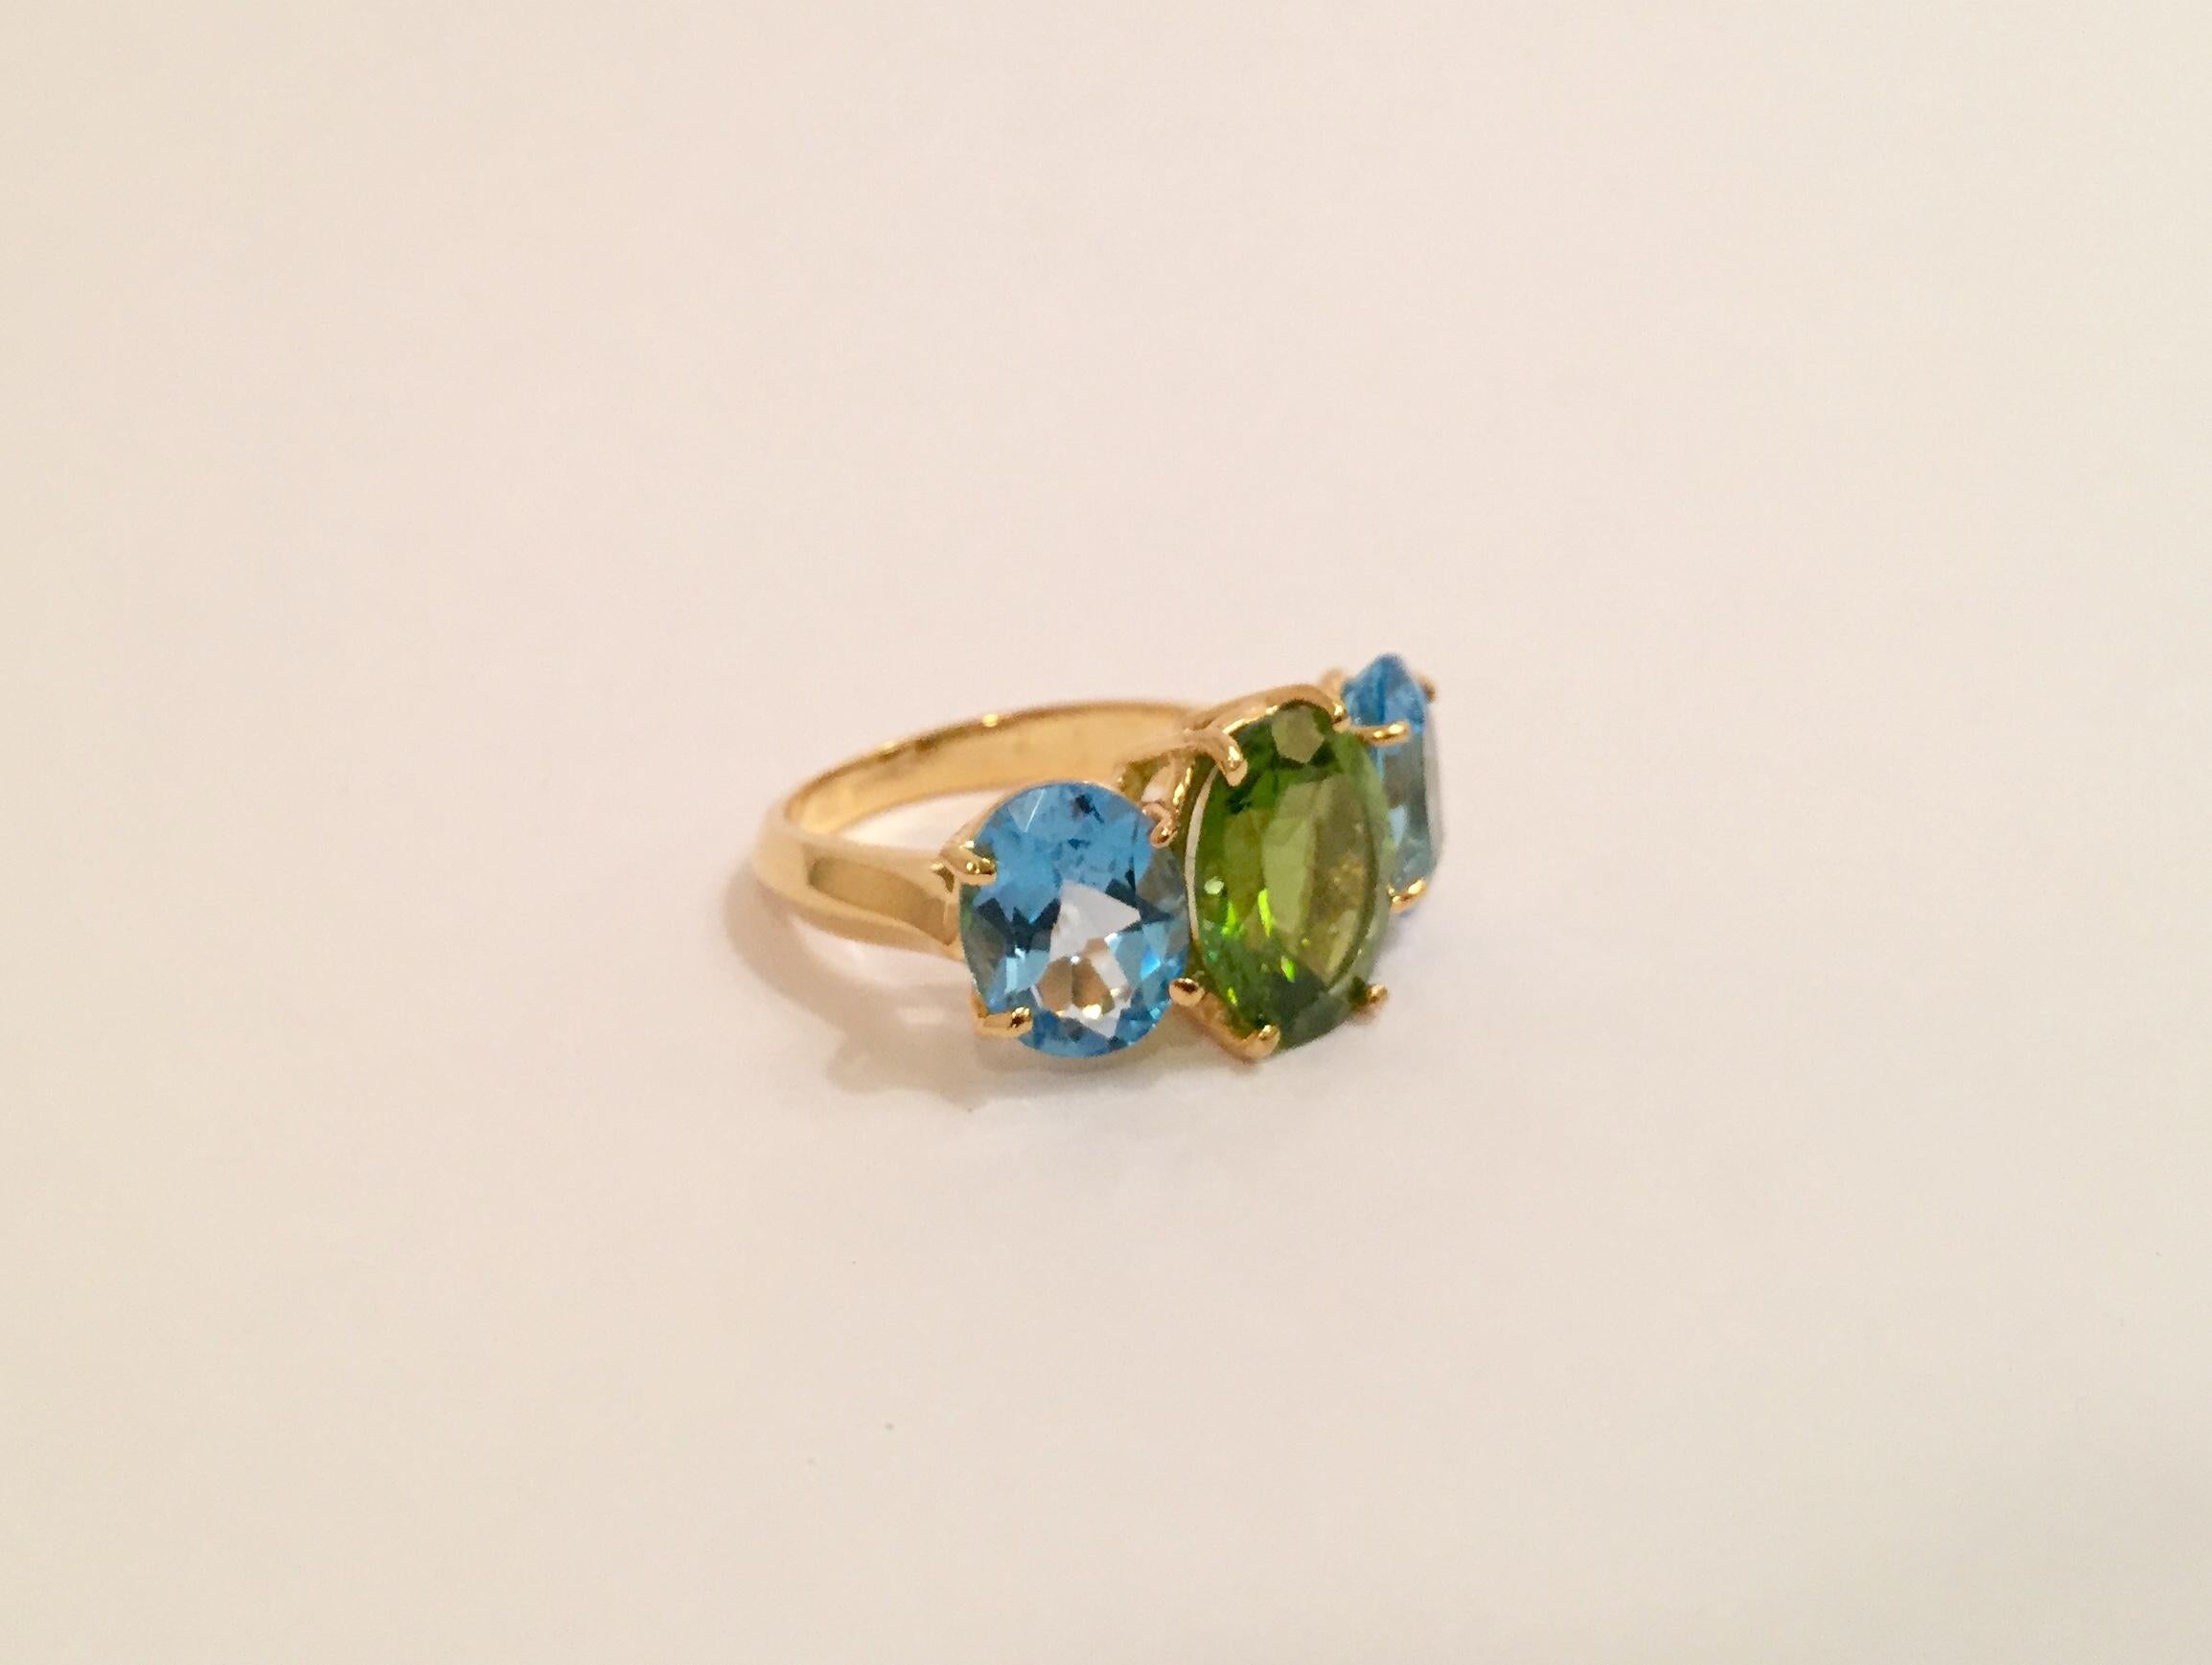 Medium 18kt Yellow Gold Gum Drop ring with Peridot (approximately 5 cts)and Blue Topaz (approximately 4 cts each),

Specifications: Length: 7/8